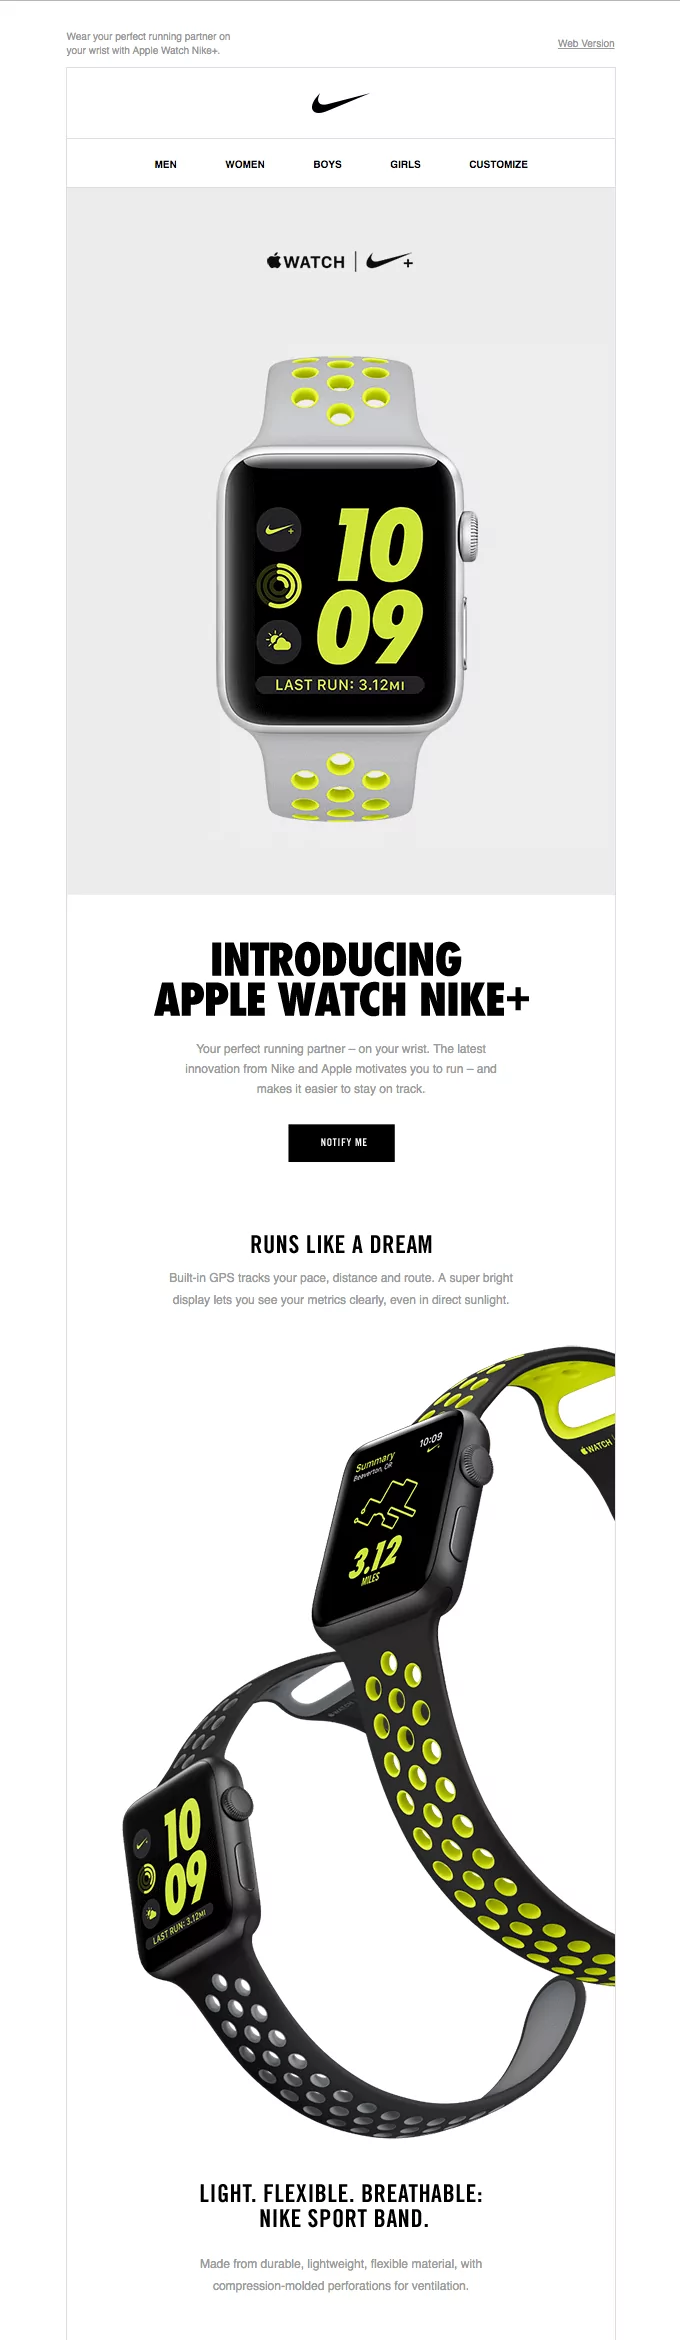 Introducing Apple Watch Nike+ product launch email sample